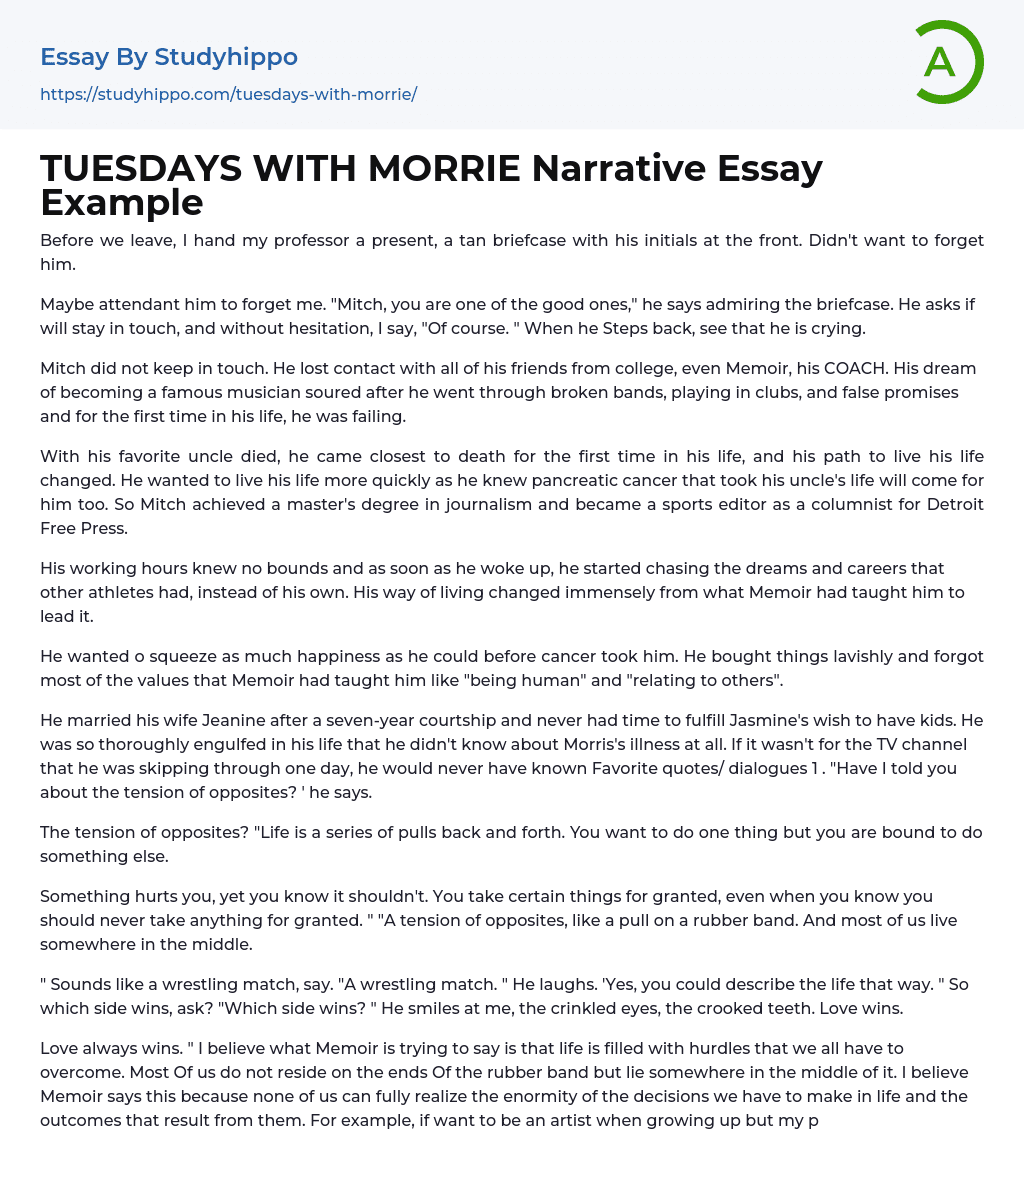 tuesdays with morrie final essay